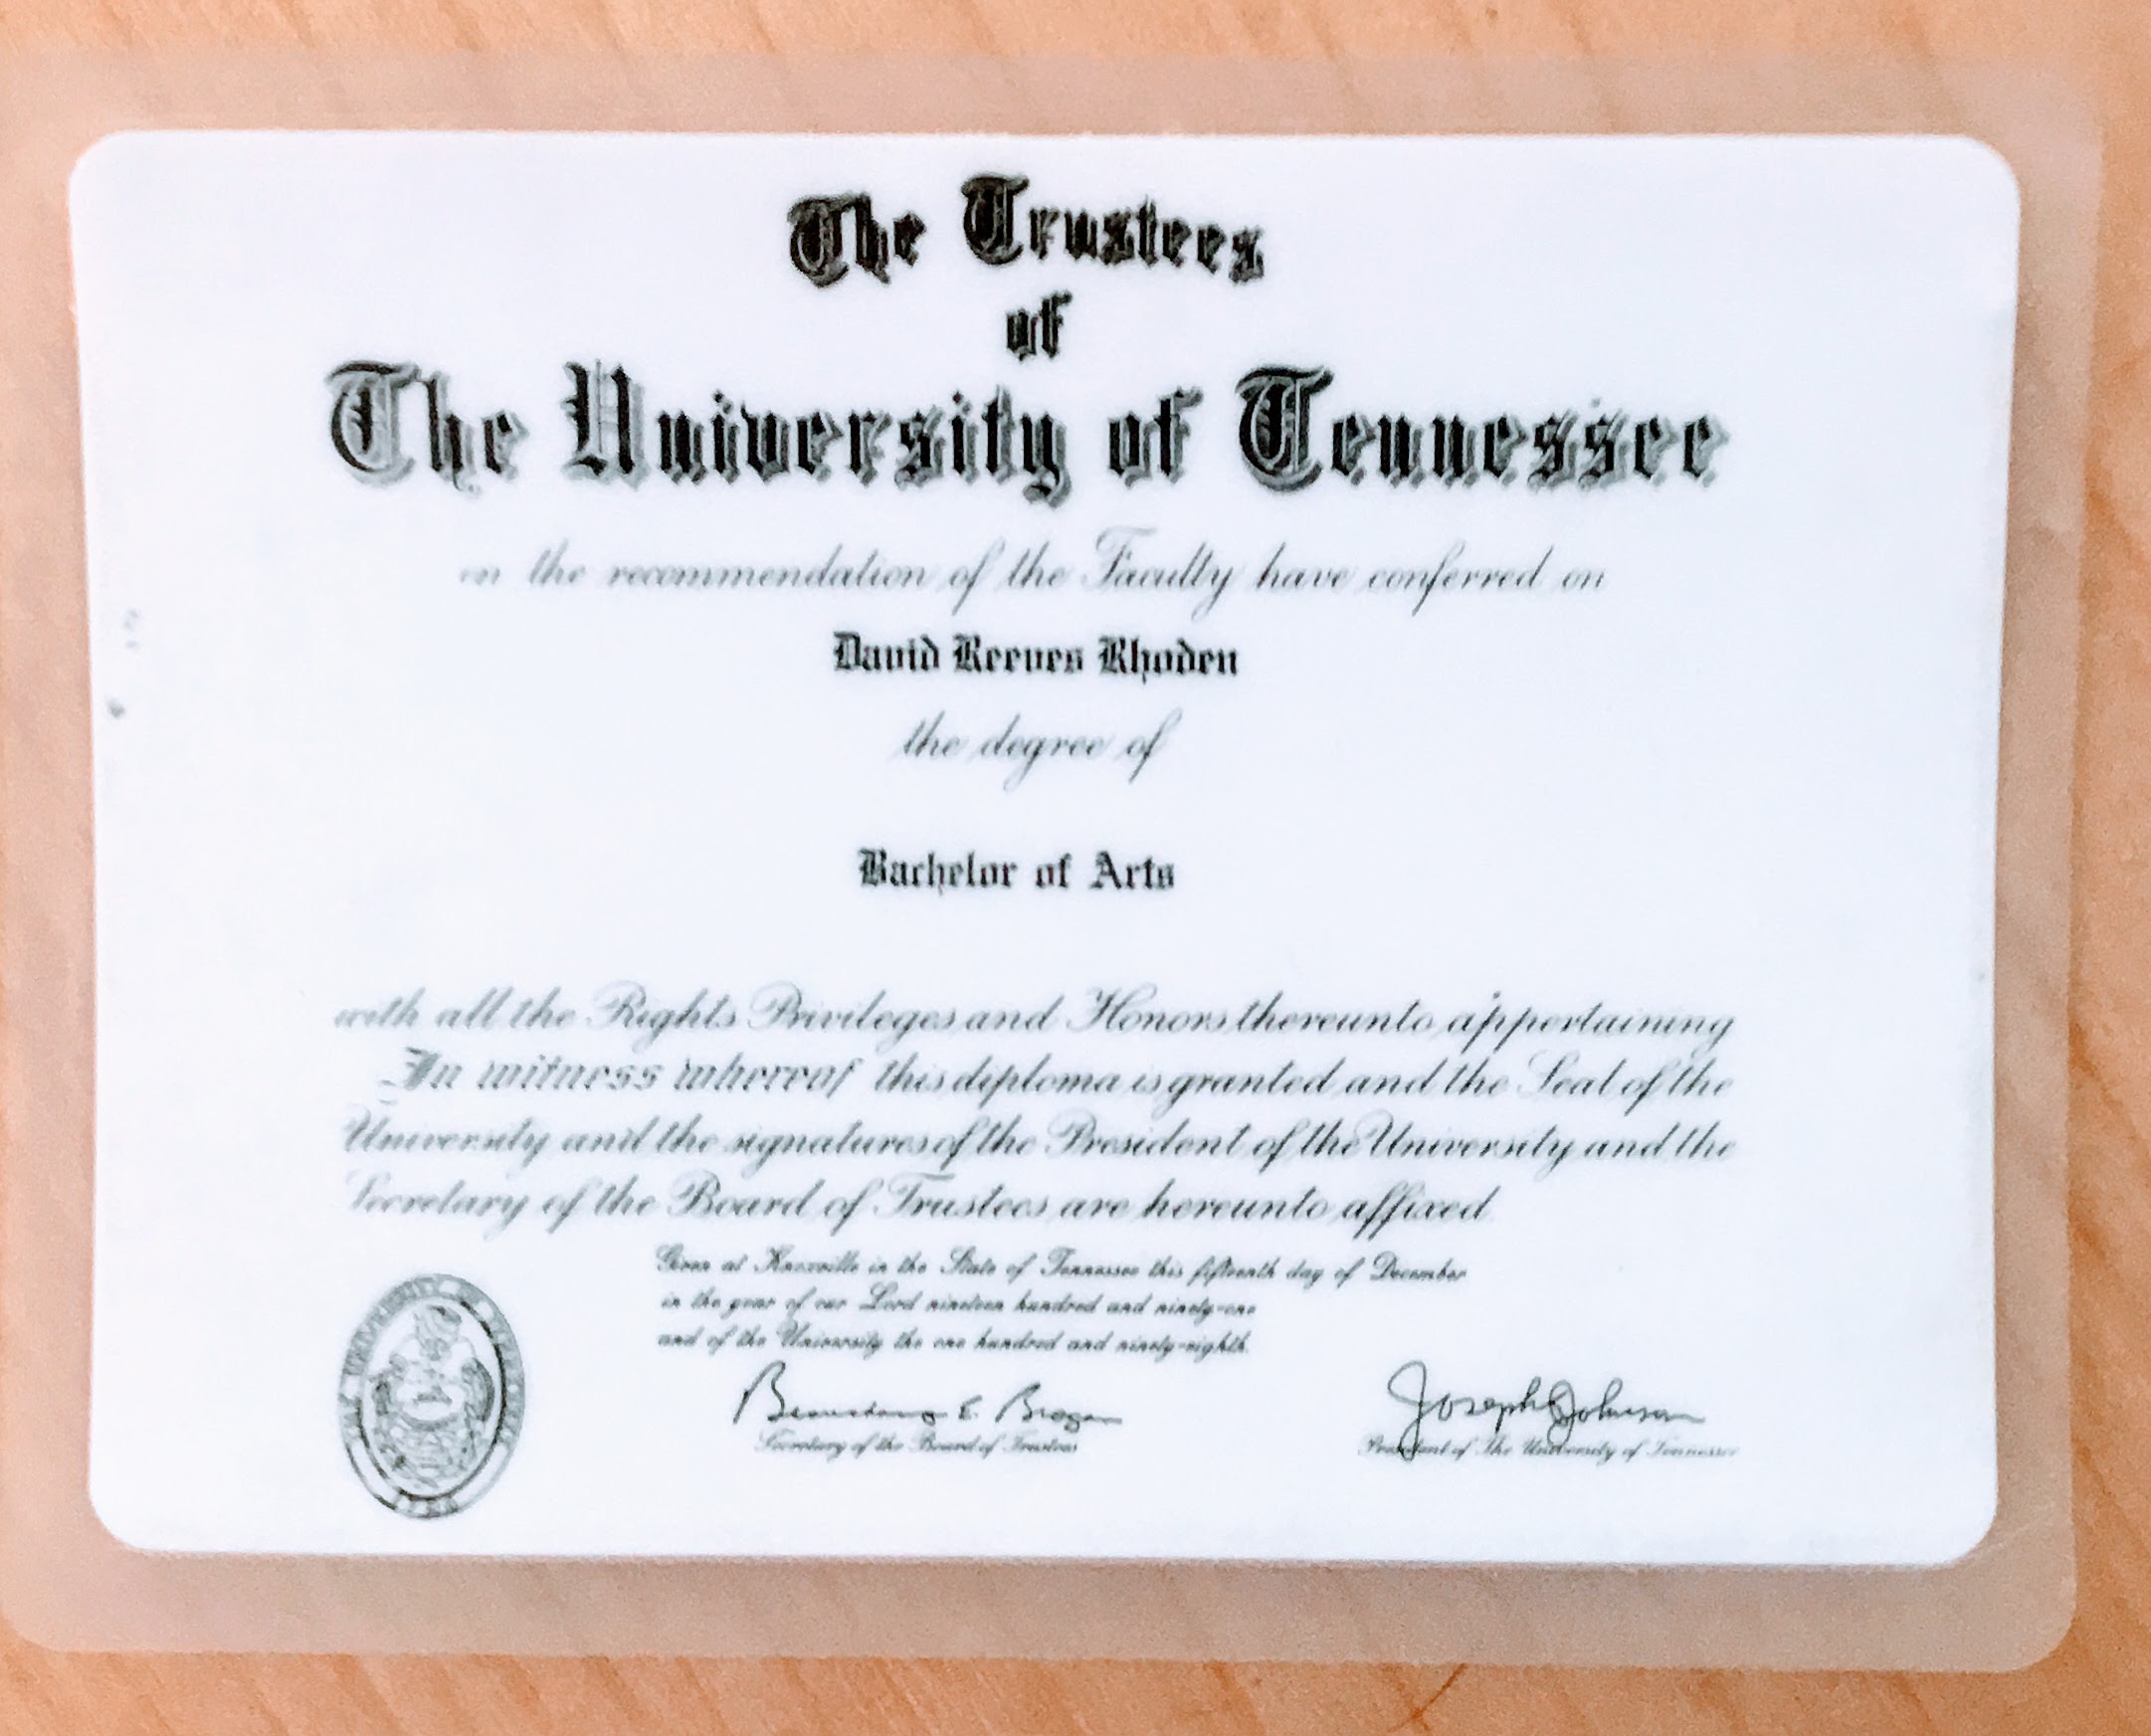 a miniature diploma for a Bachelor of Arts from the University of Tennessee